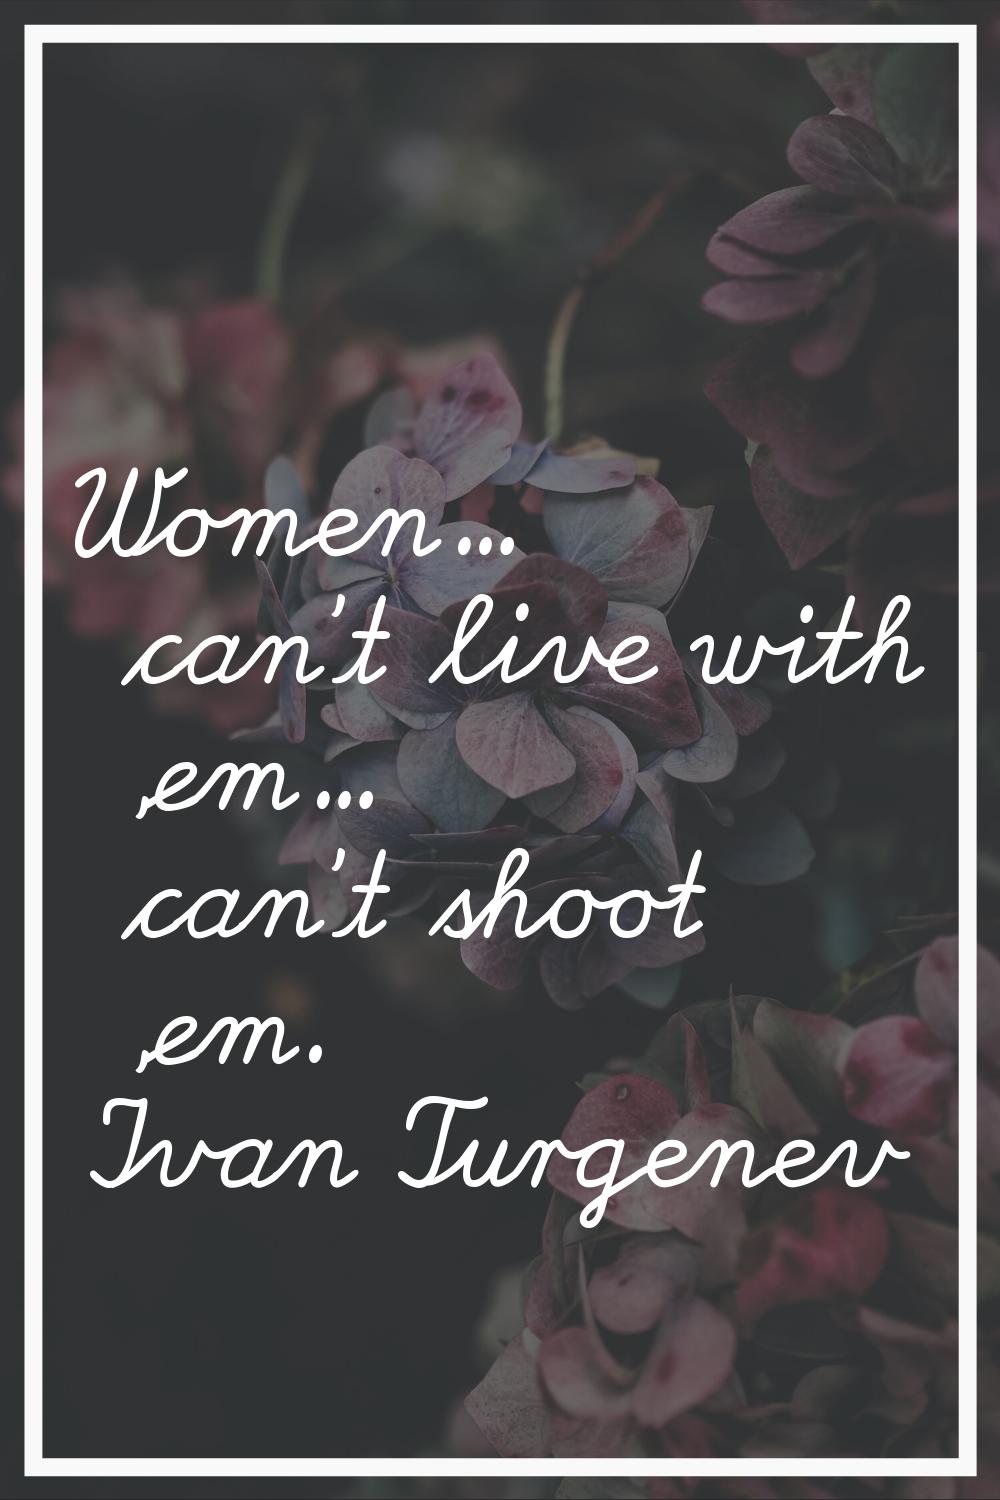 Women... can't live with 'em... can't shoot 'em.